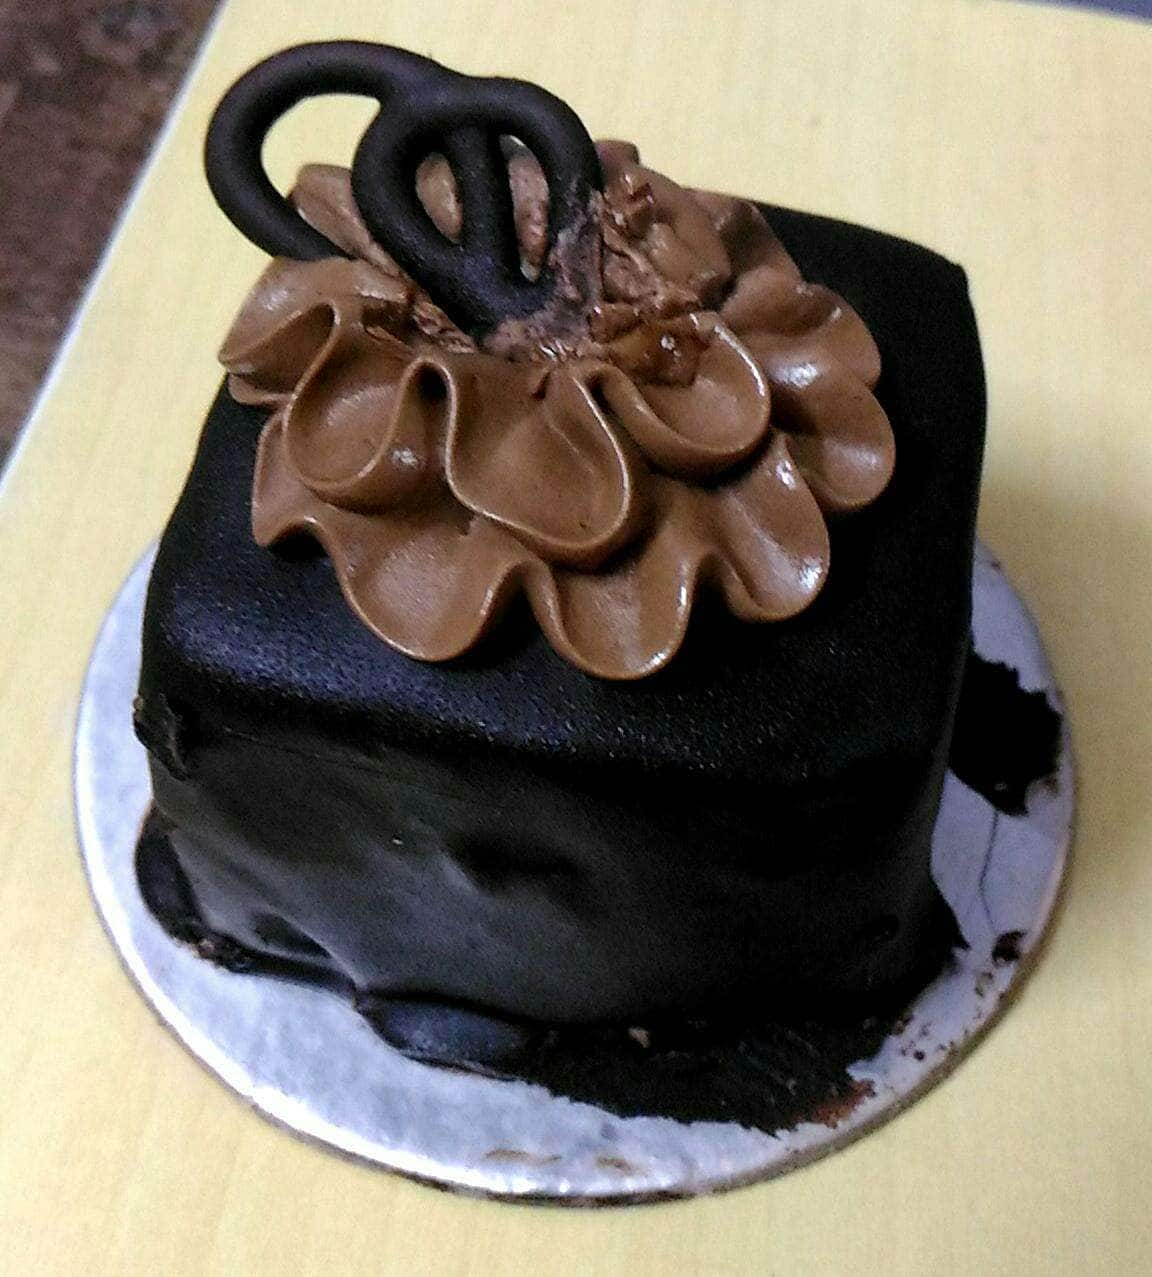 Get Best Cakes Online With Cake Delivery Services in Kolkata